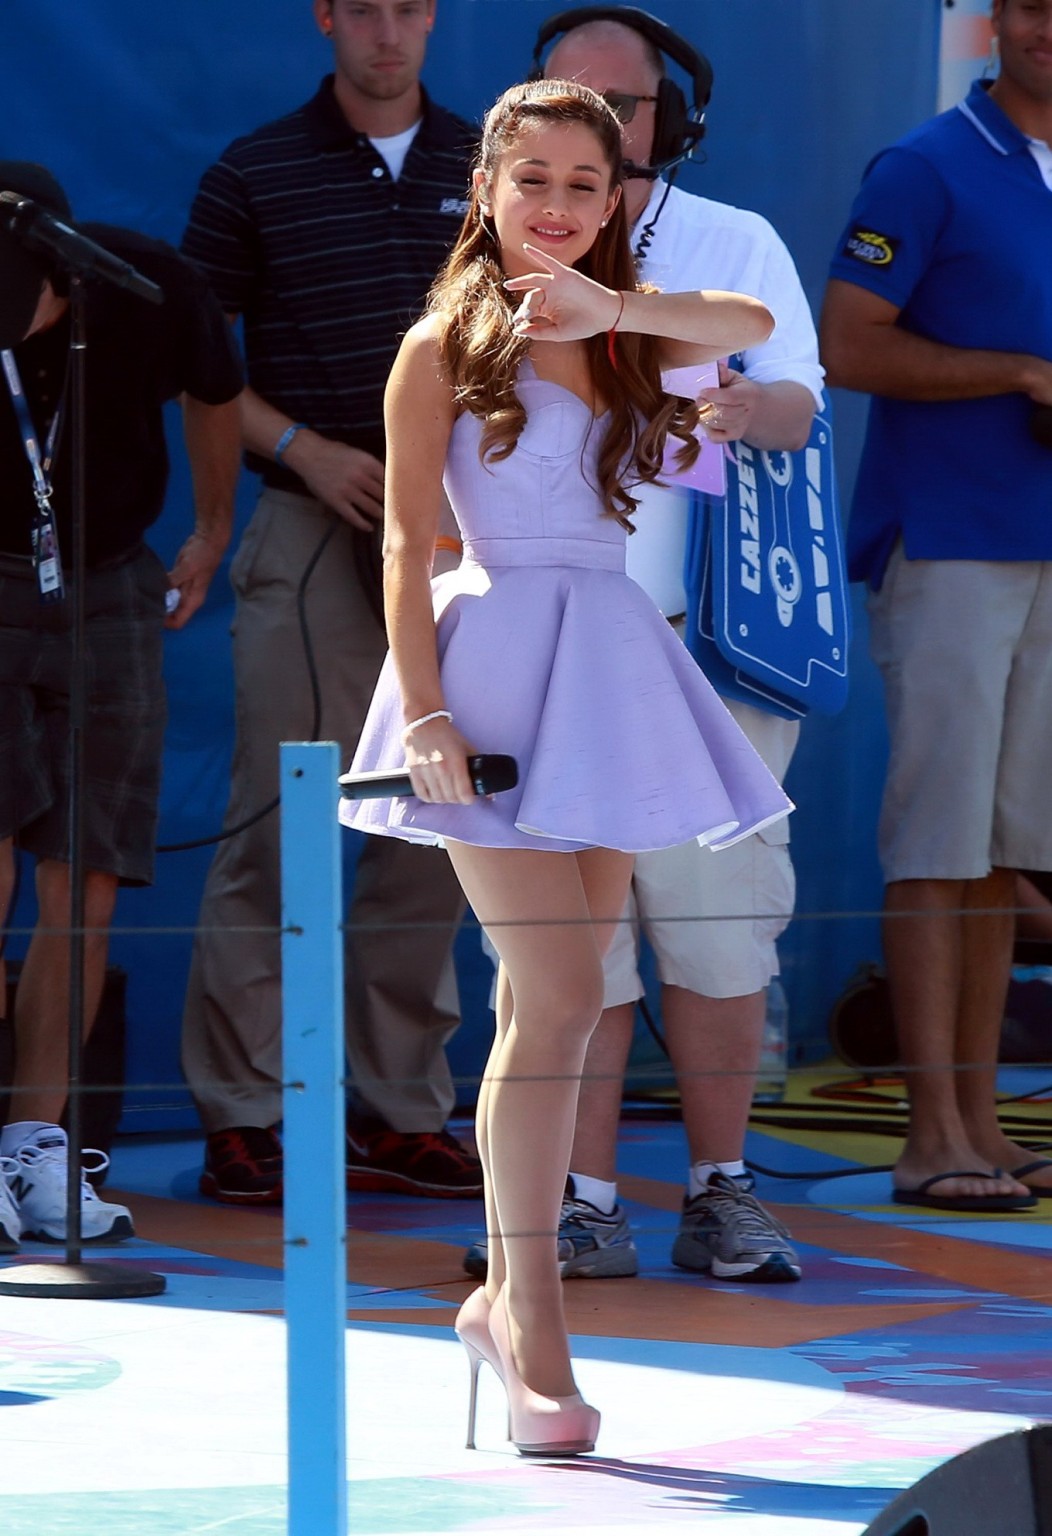 Ariana Grande leggy performing at the event in NYC #75220987